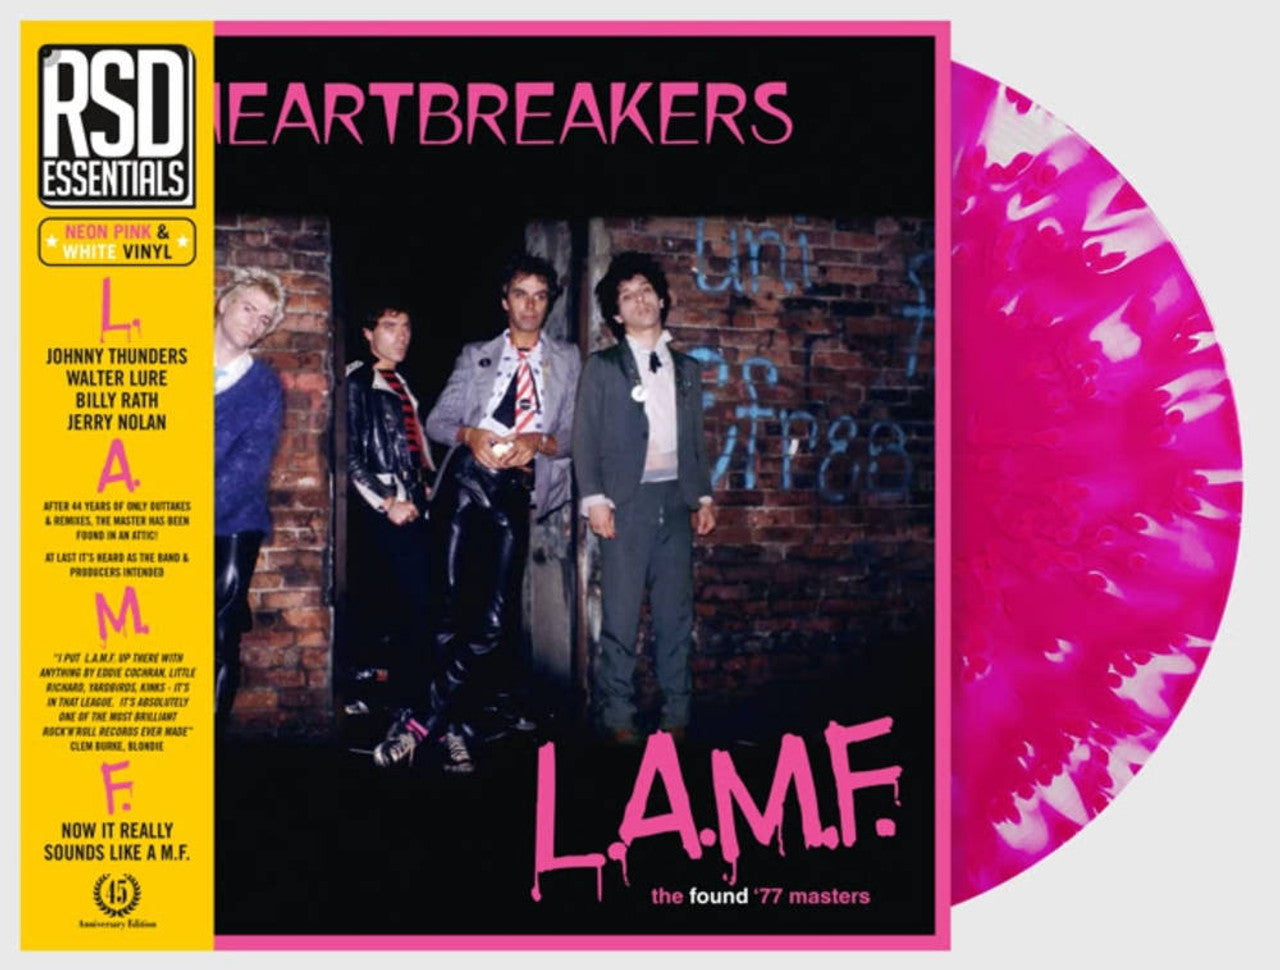 Johnny Thunders and The Heartbreakers - L.A.M.F.: The Found '77 Masters  [Ltd Ed Neon Pink & White Vinyl] (RSD Essentials 2022)